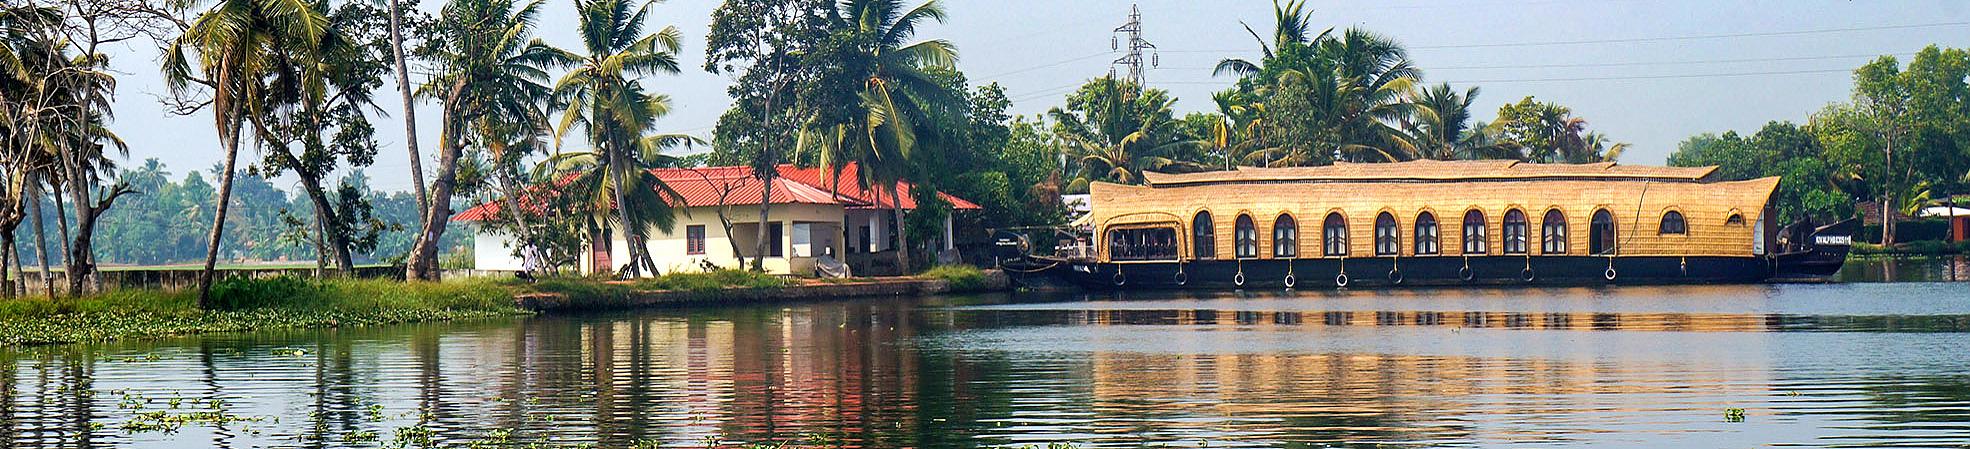 India's Backwaters